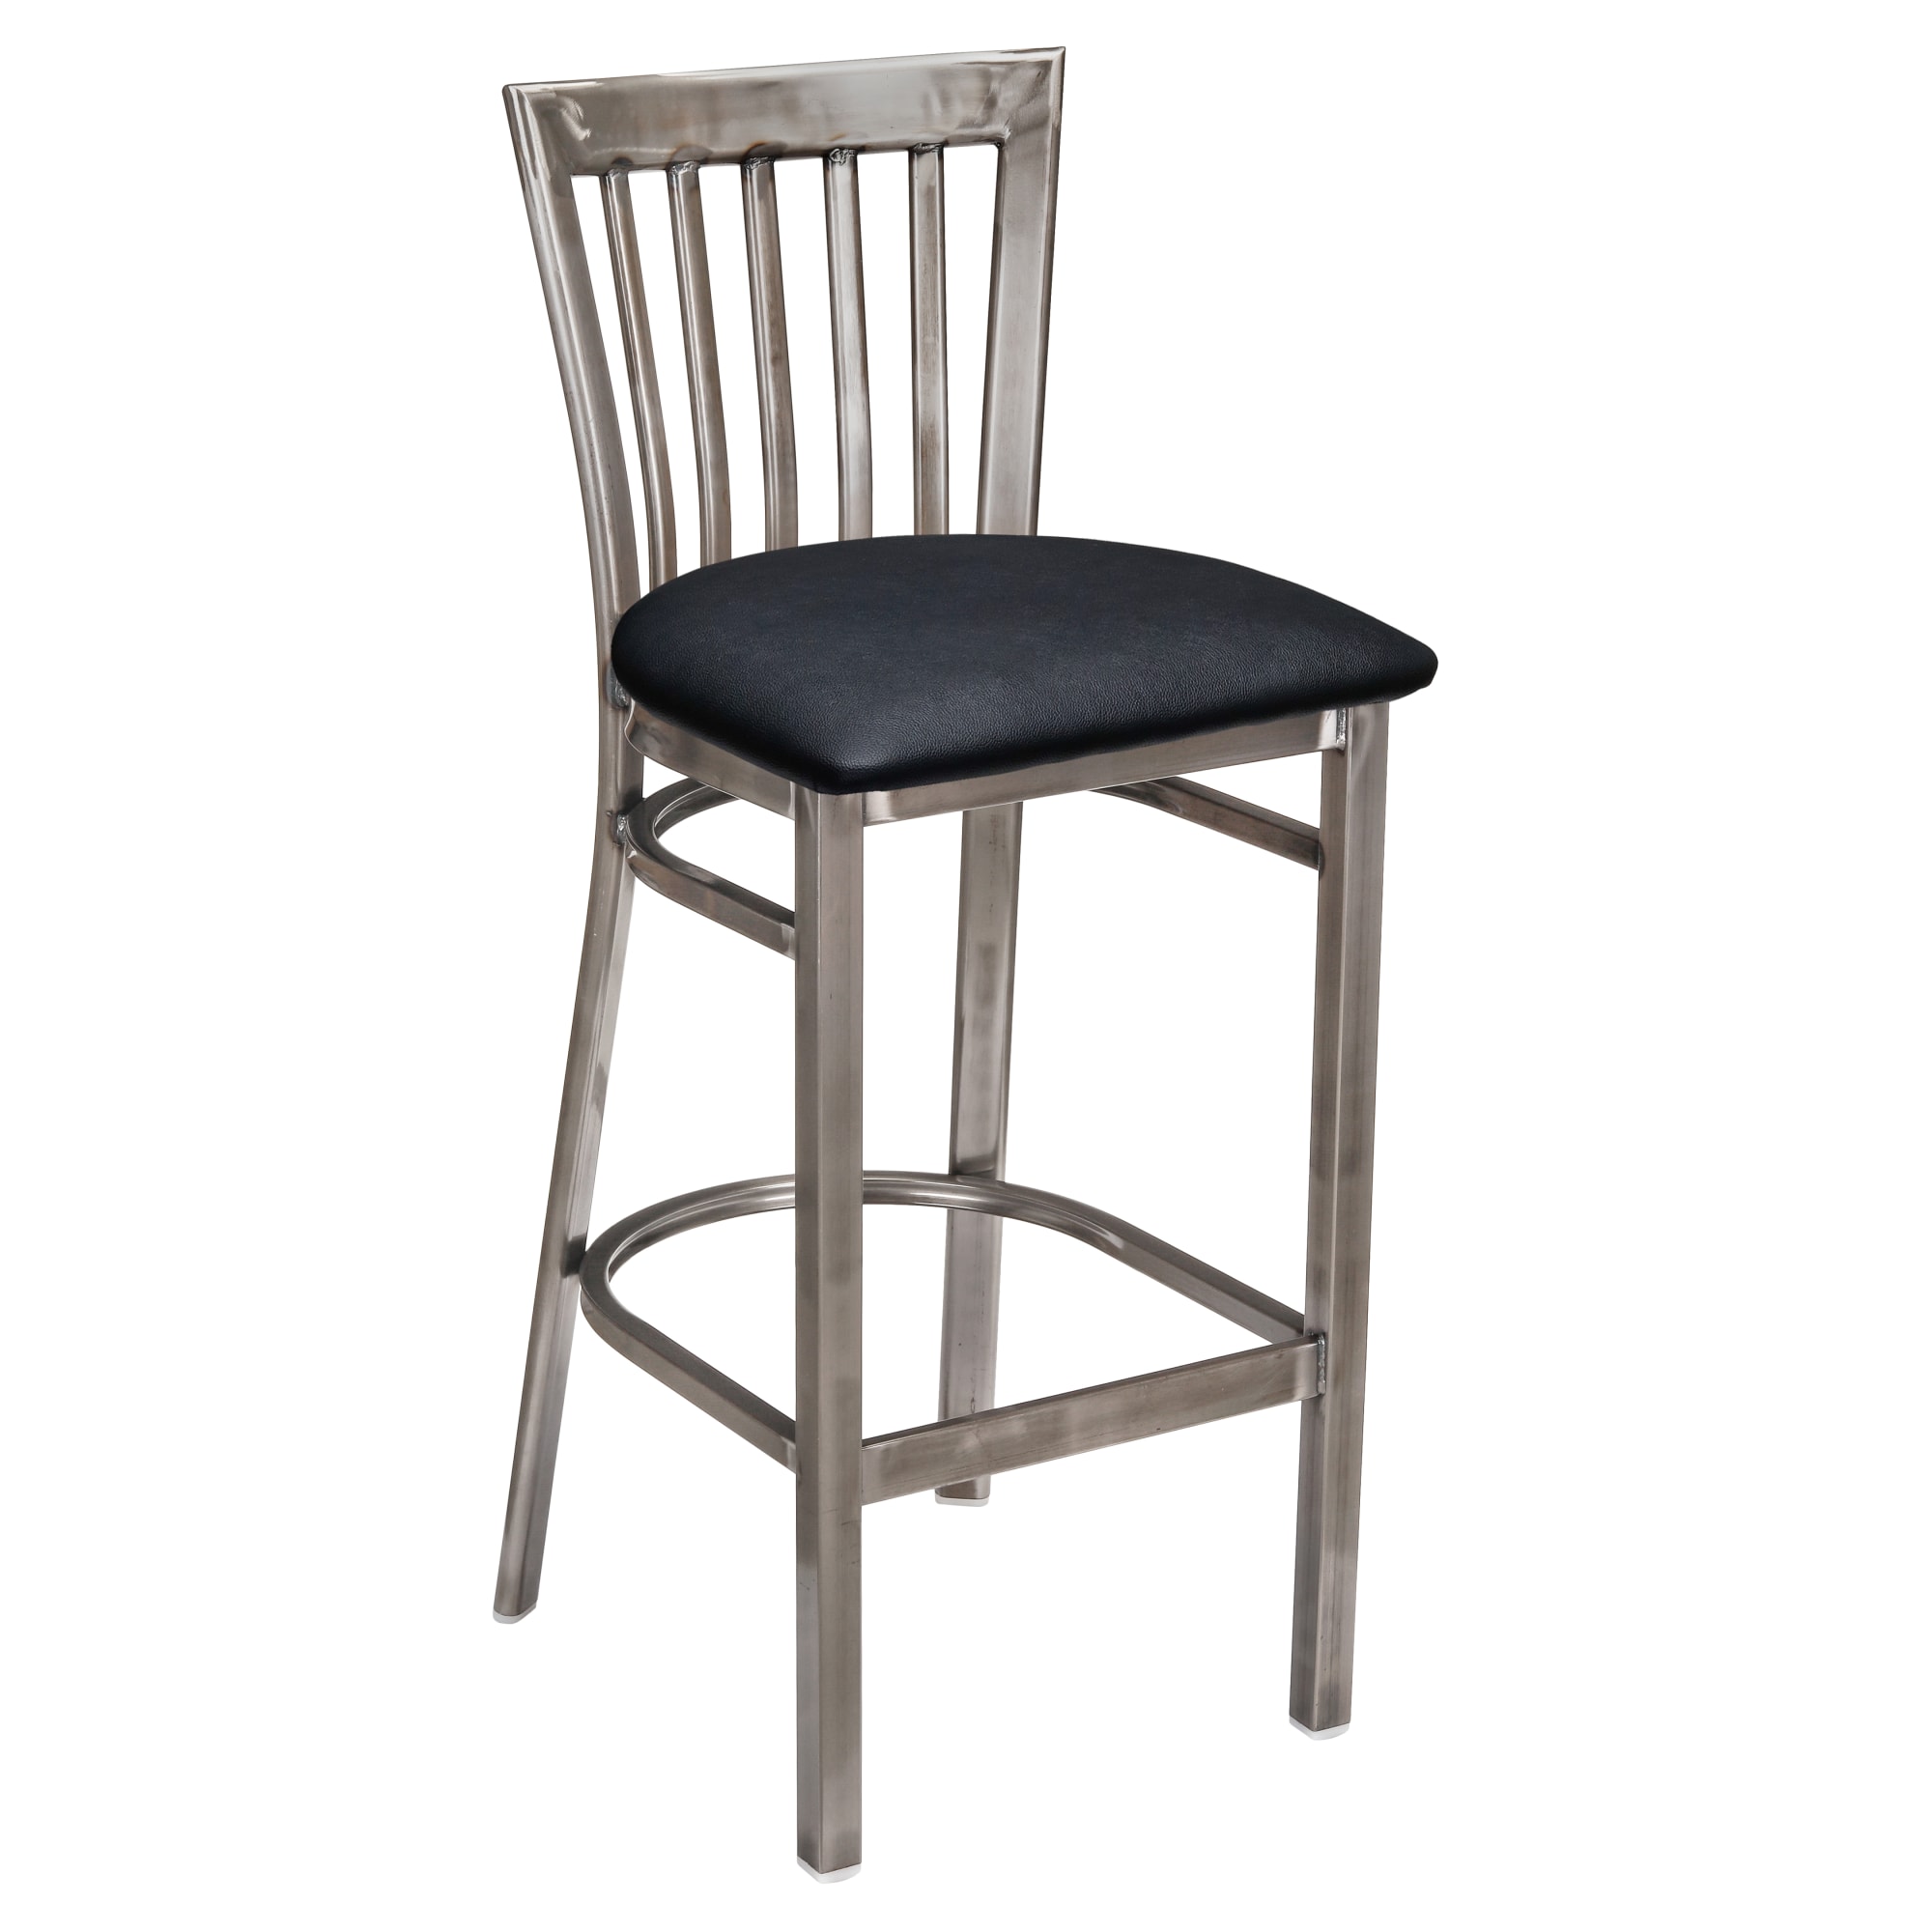 Clear Coat Elongated Back Metal Bar Stool with Clear Coat Elongated Back Metal Bar Stool